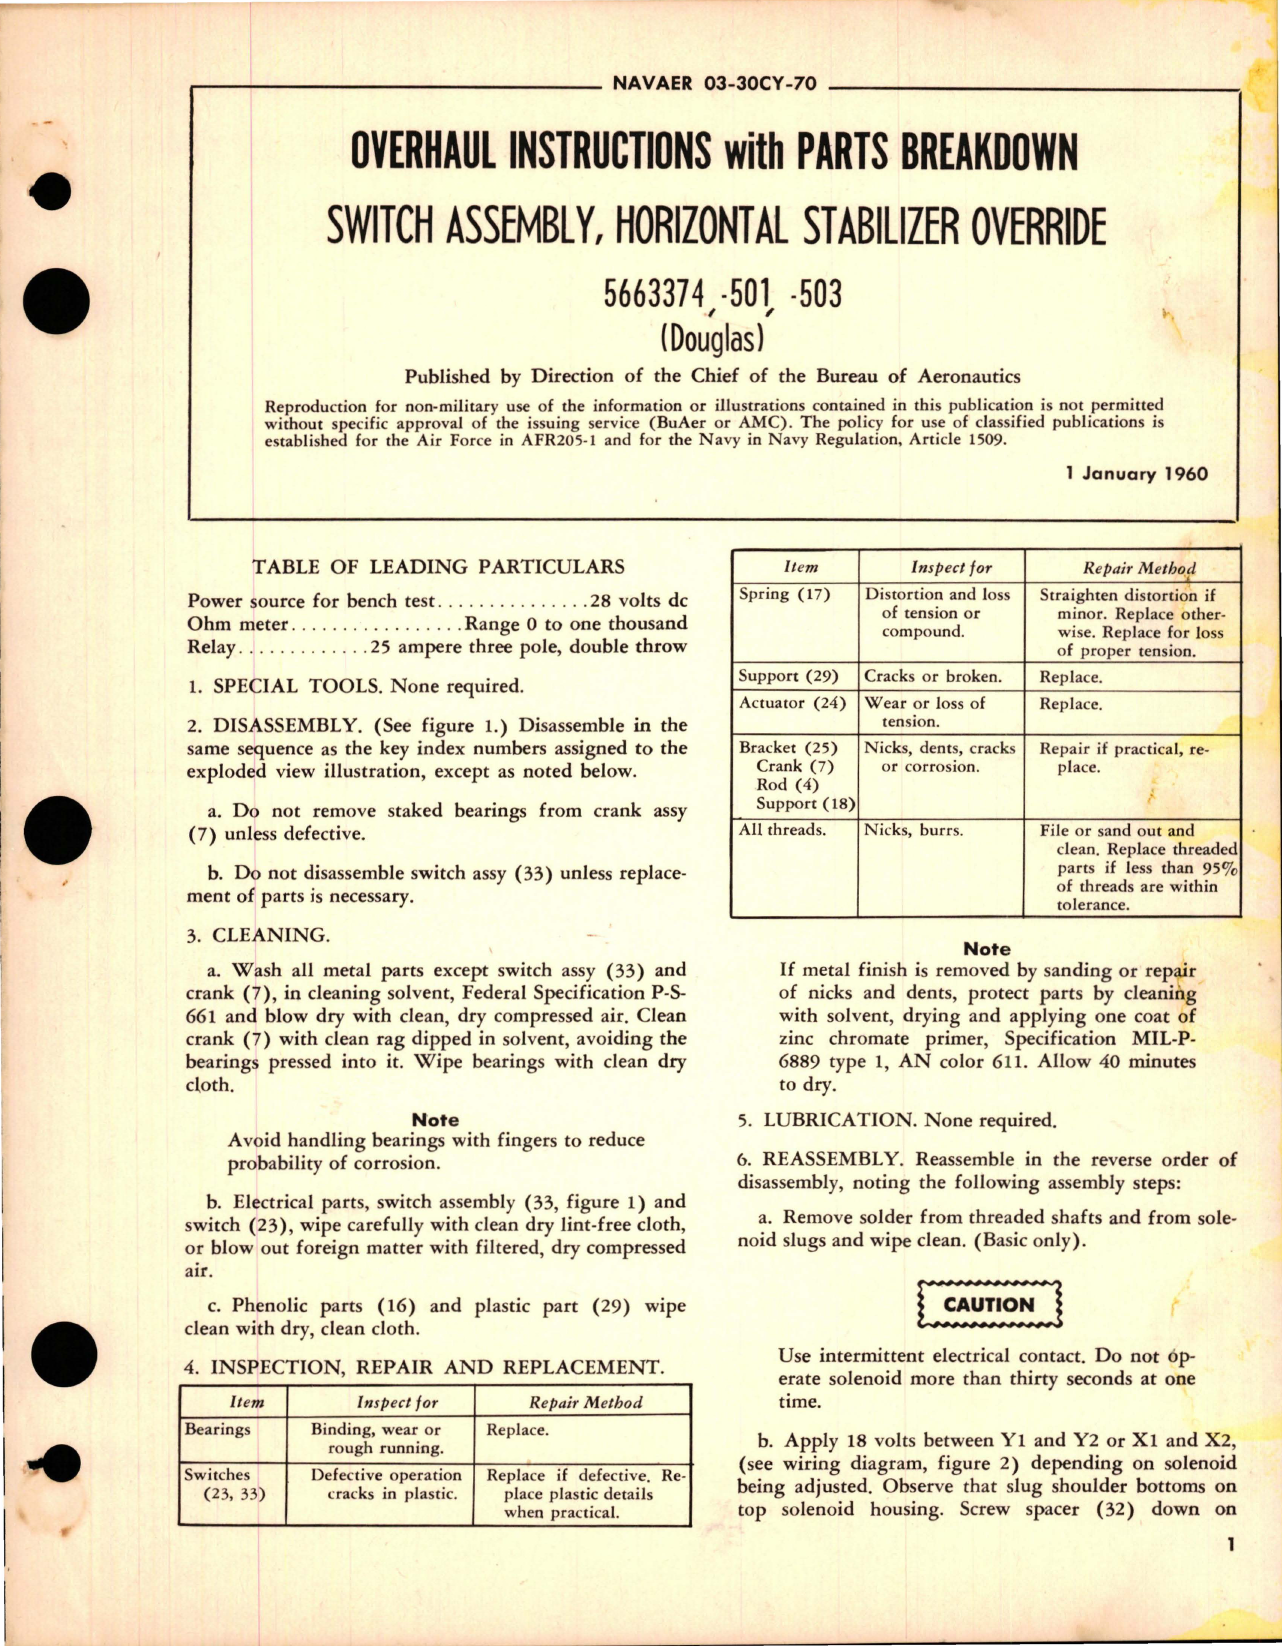 Sample page 1 from AirCorps Library document: Overhaul Instructions with Parts Breakdown for Horizontal Stabilizer Override Switch Assembly - 5663374-501 and 5663374-503